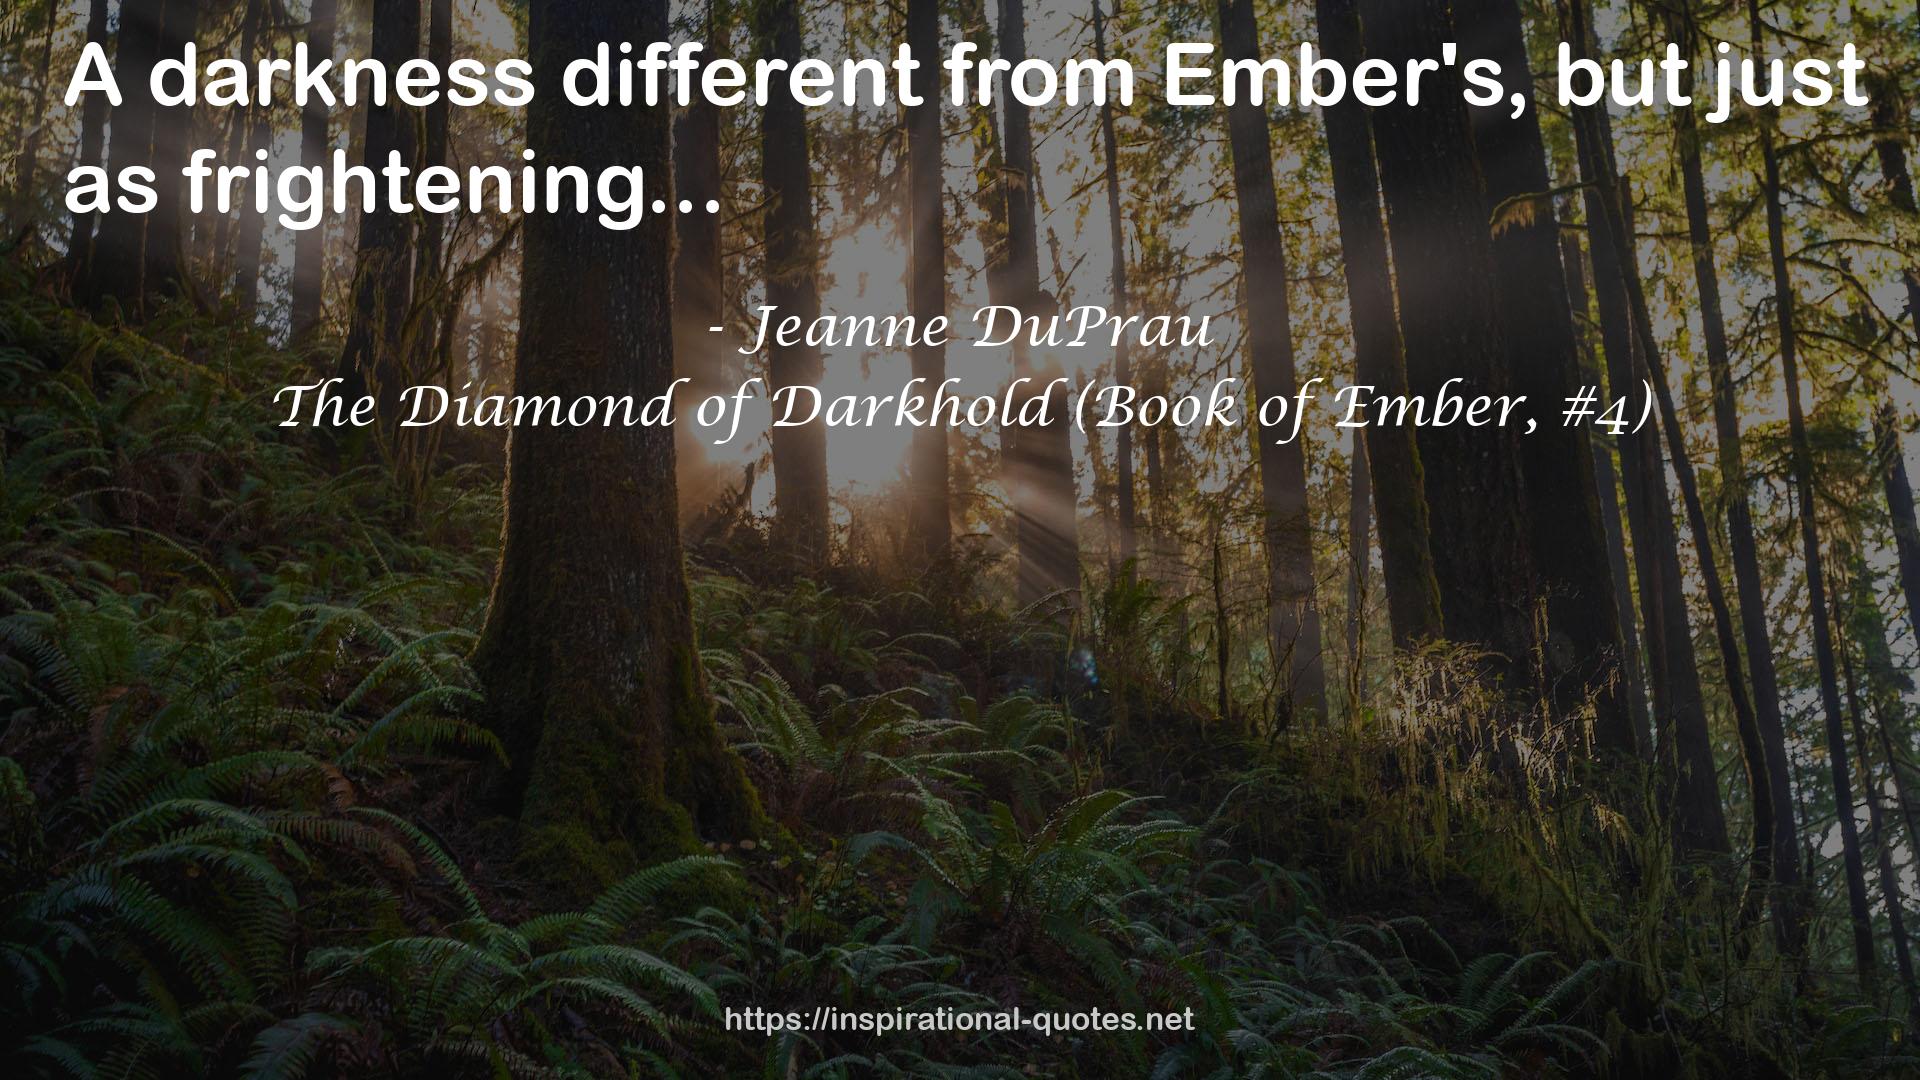 The Diamond of Darkhold (Book of Ember, #4) QUOTES